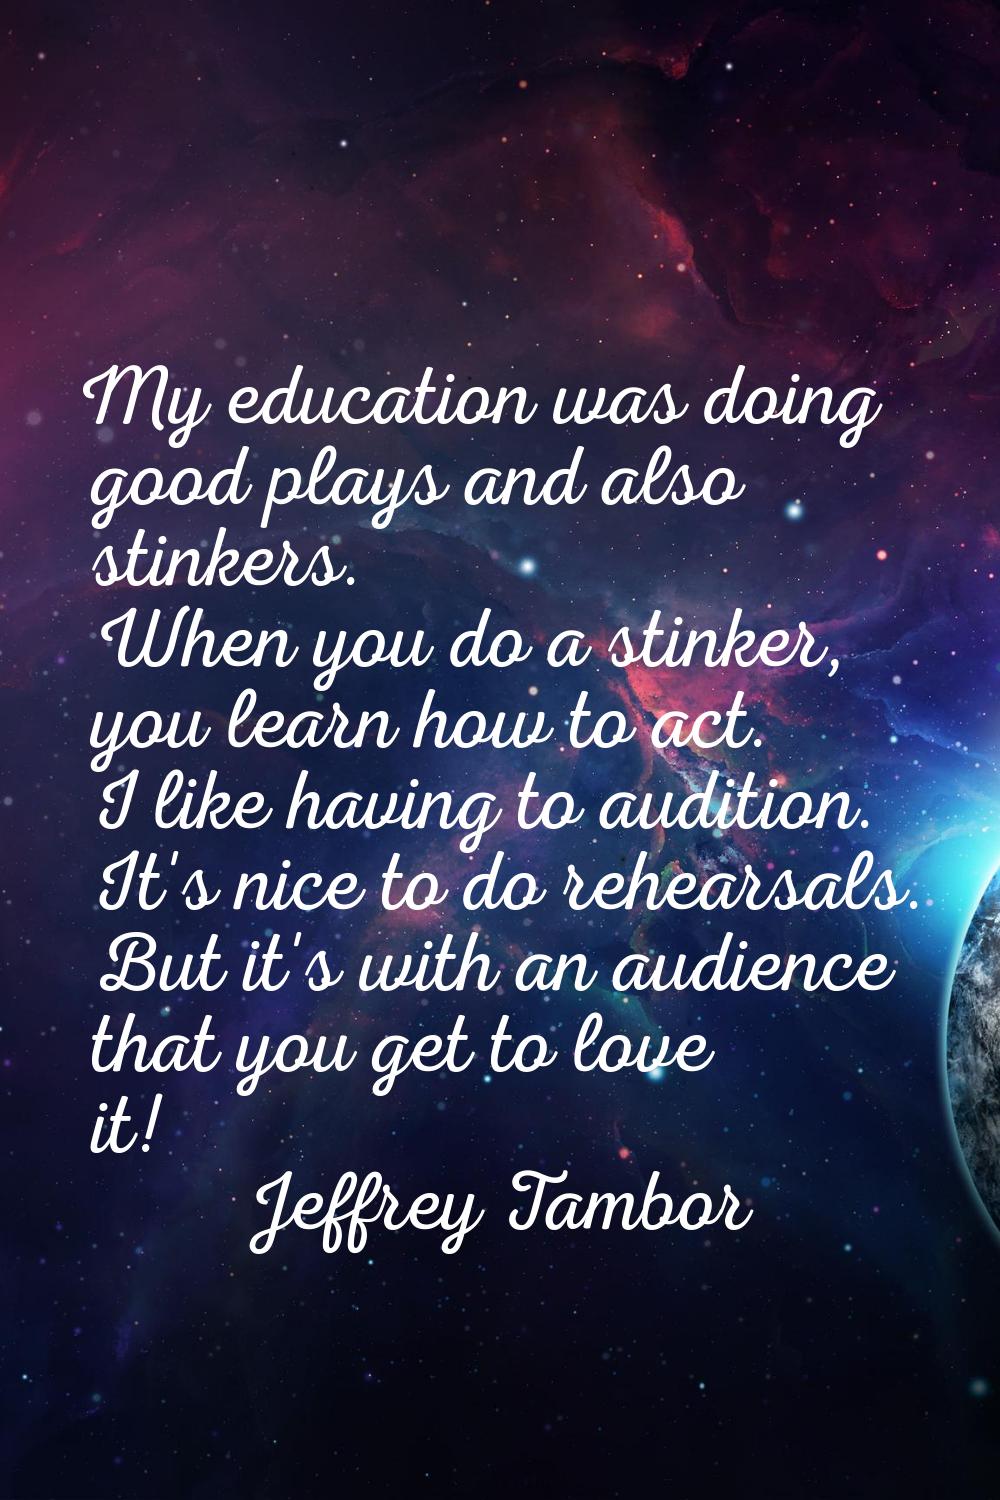 My education was doing good plays and also stinkers. When you do a stinker, you learn how to act. I